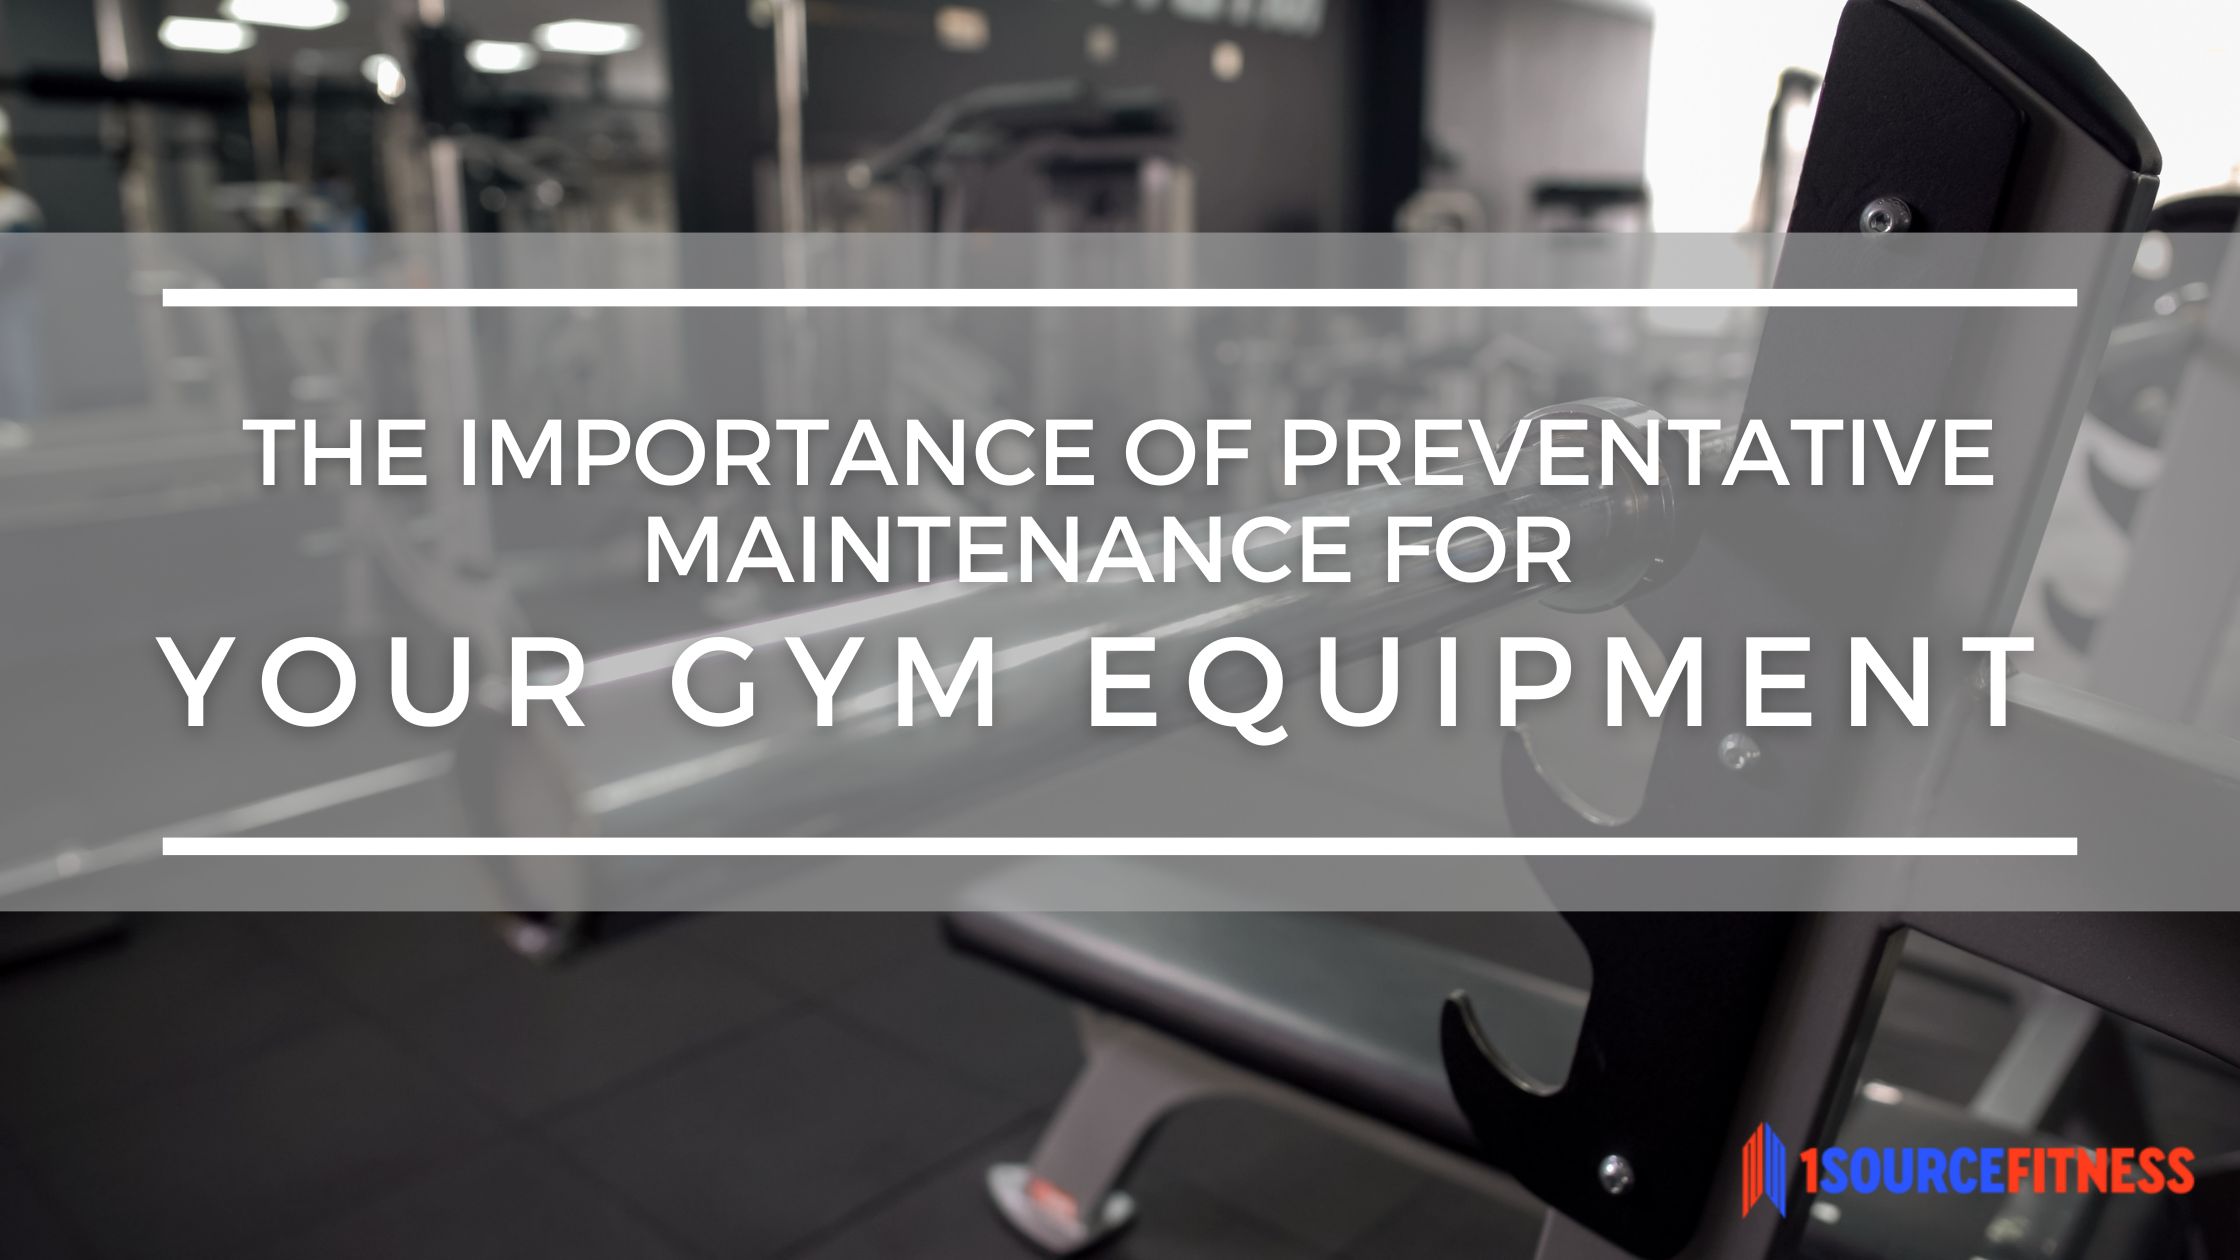 Gym Equipment to maintain